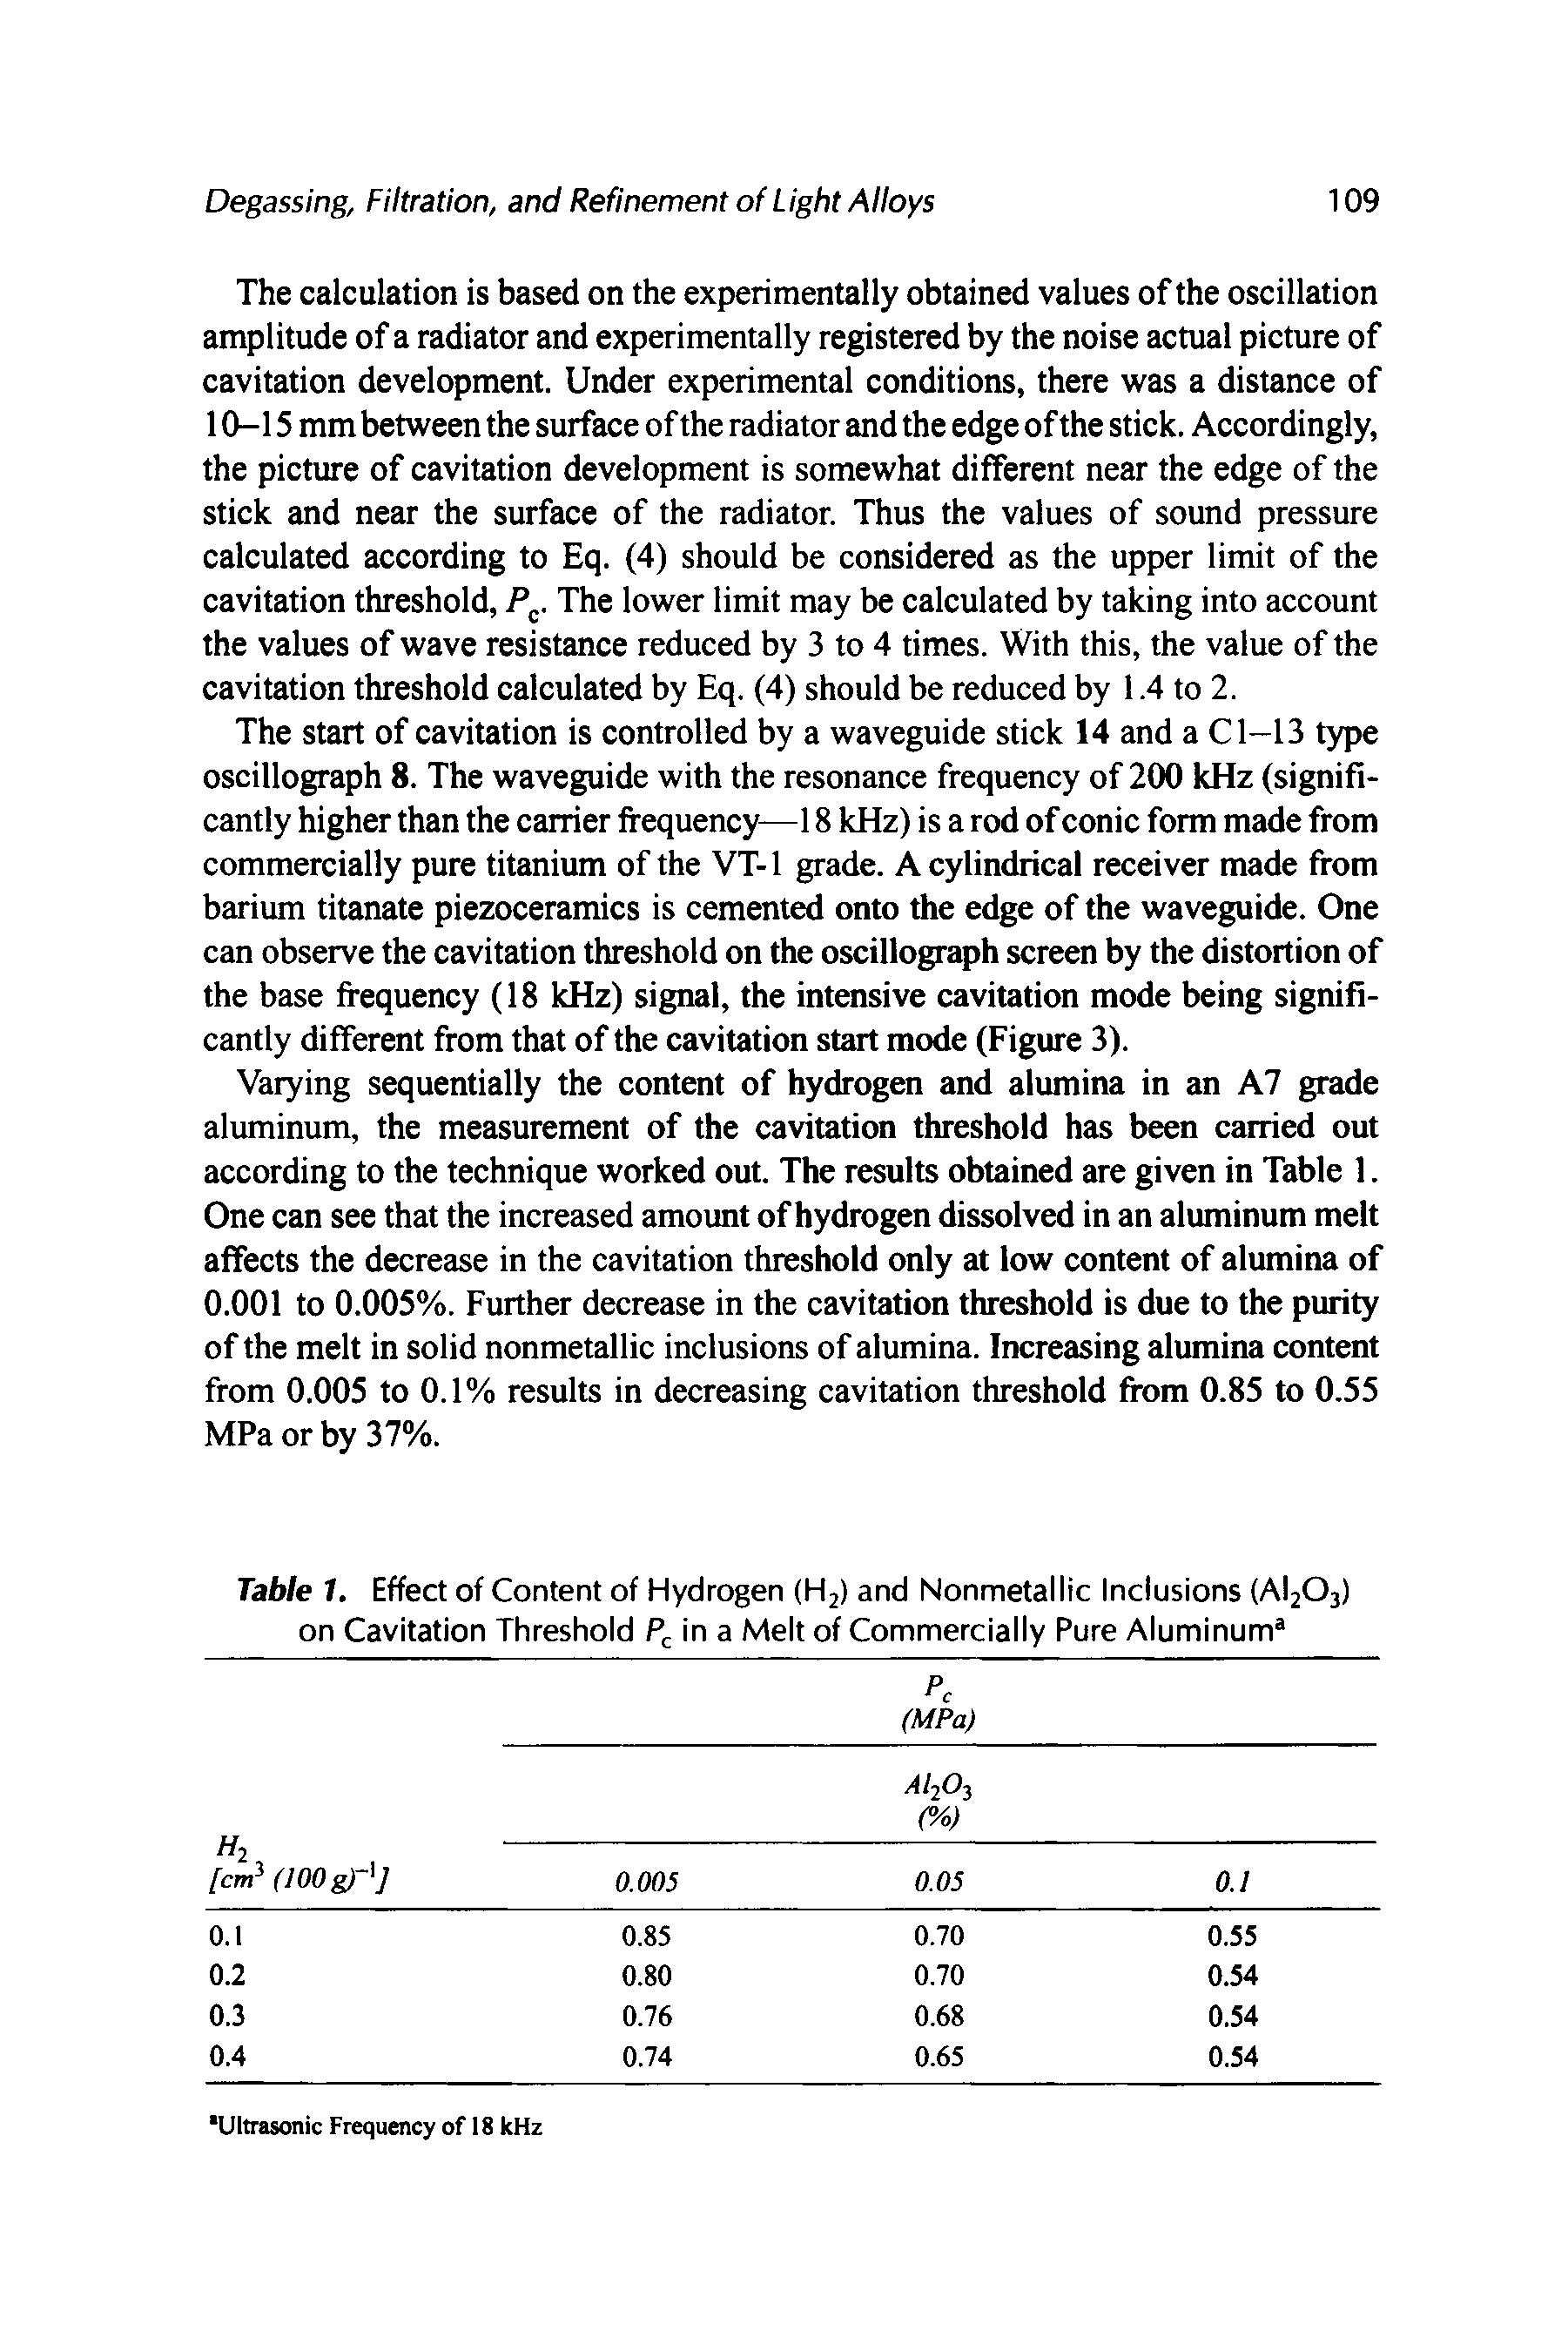 Table 1. Effect of Content of Hydrogen (H2) and Nonmetallic Inclusions (Al203) on Cavitation Threshold Pc in a Melt of Commercially Pure Aluminum3...